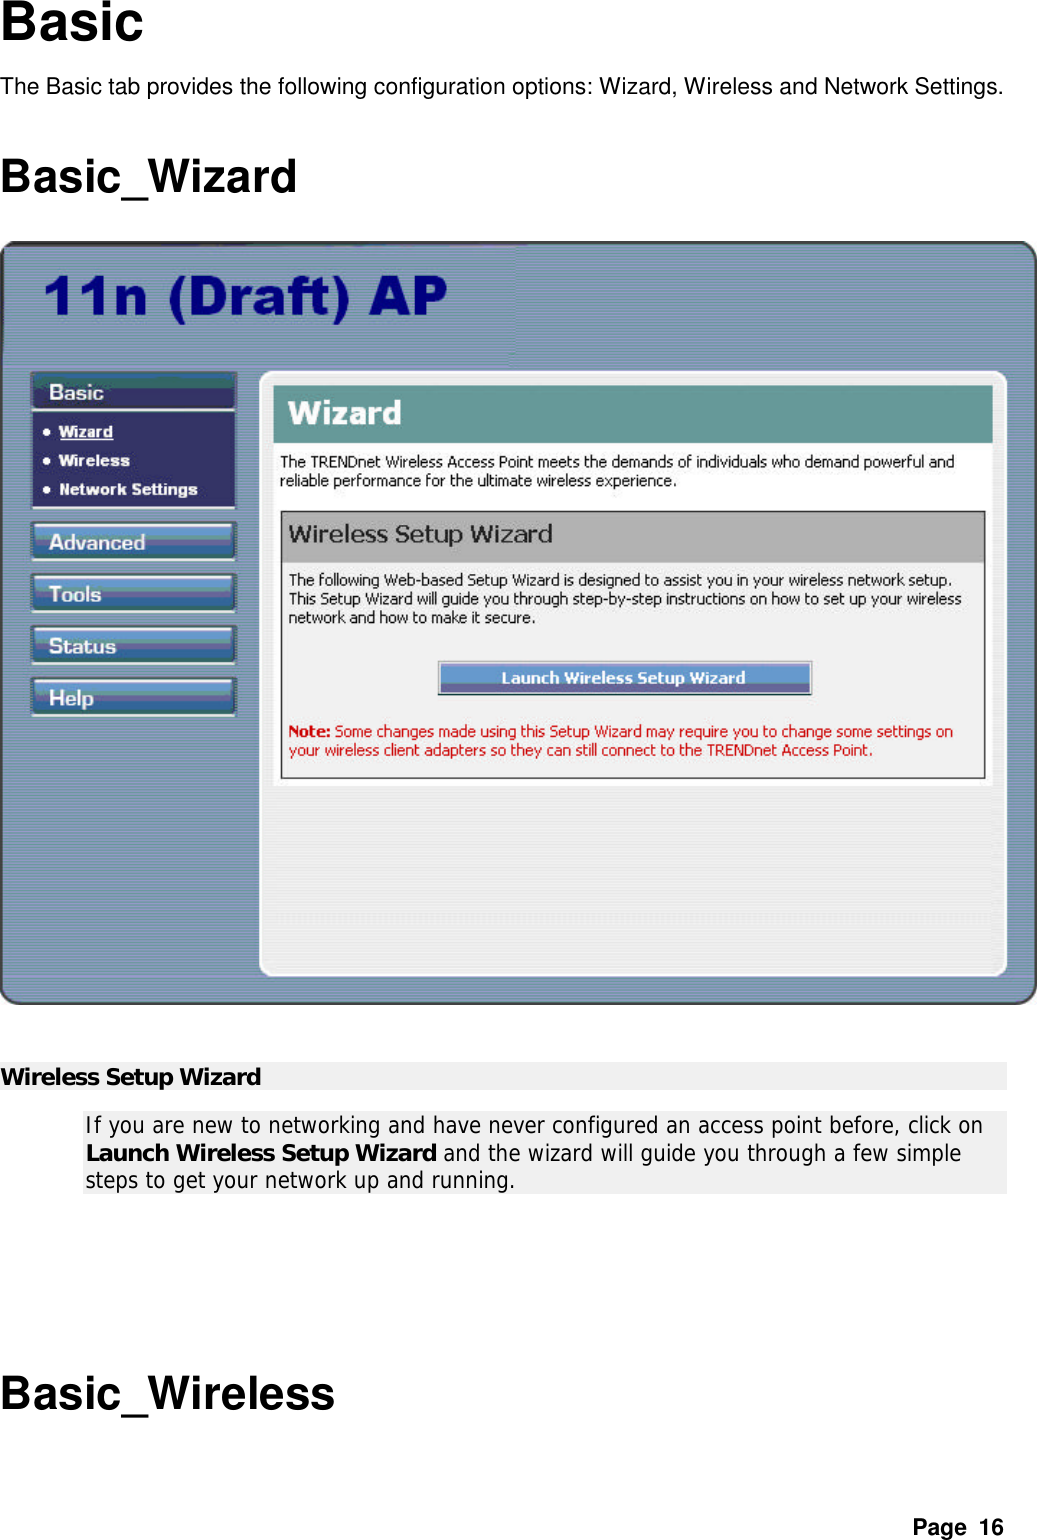 Page  16 Basic The Basic tab provides the following configuration options: Wizard, Wireless and Network Settings.    Basic_Wizard     Wireless Setup Wizard   If you are new to networking and have never configured an access point before, click on Launch Wireless Setup Wizard and the wizard will guide you through a few simple steps to get your network up and running.    Basic_Wireless 